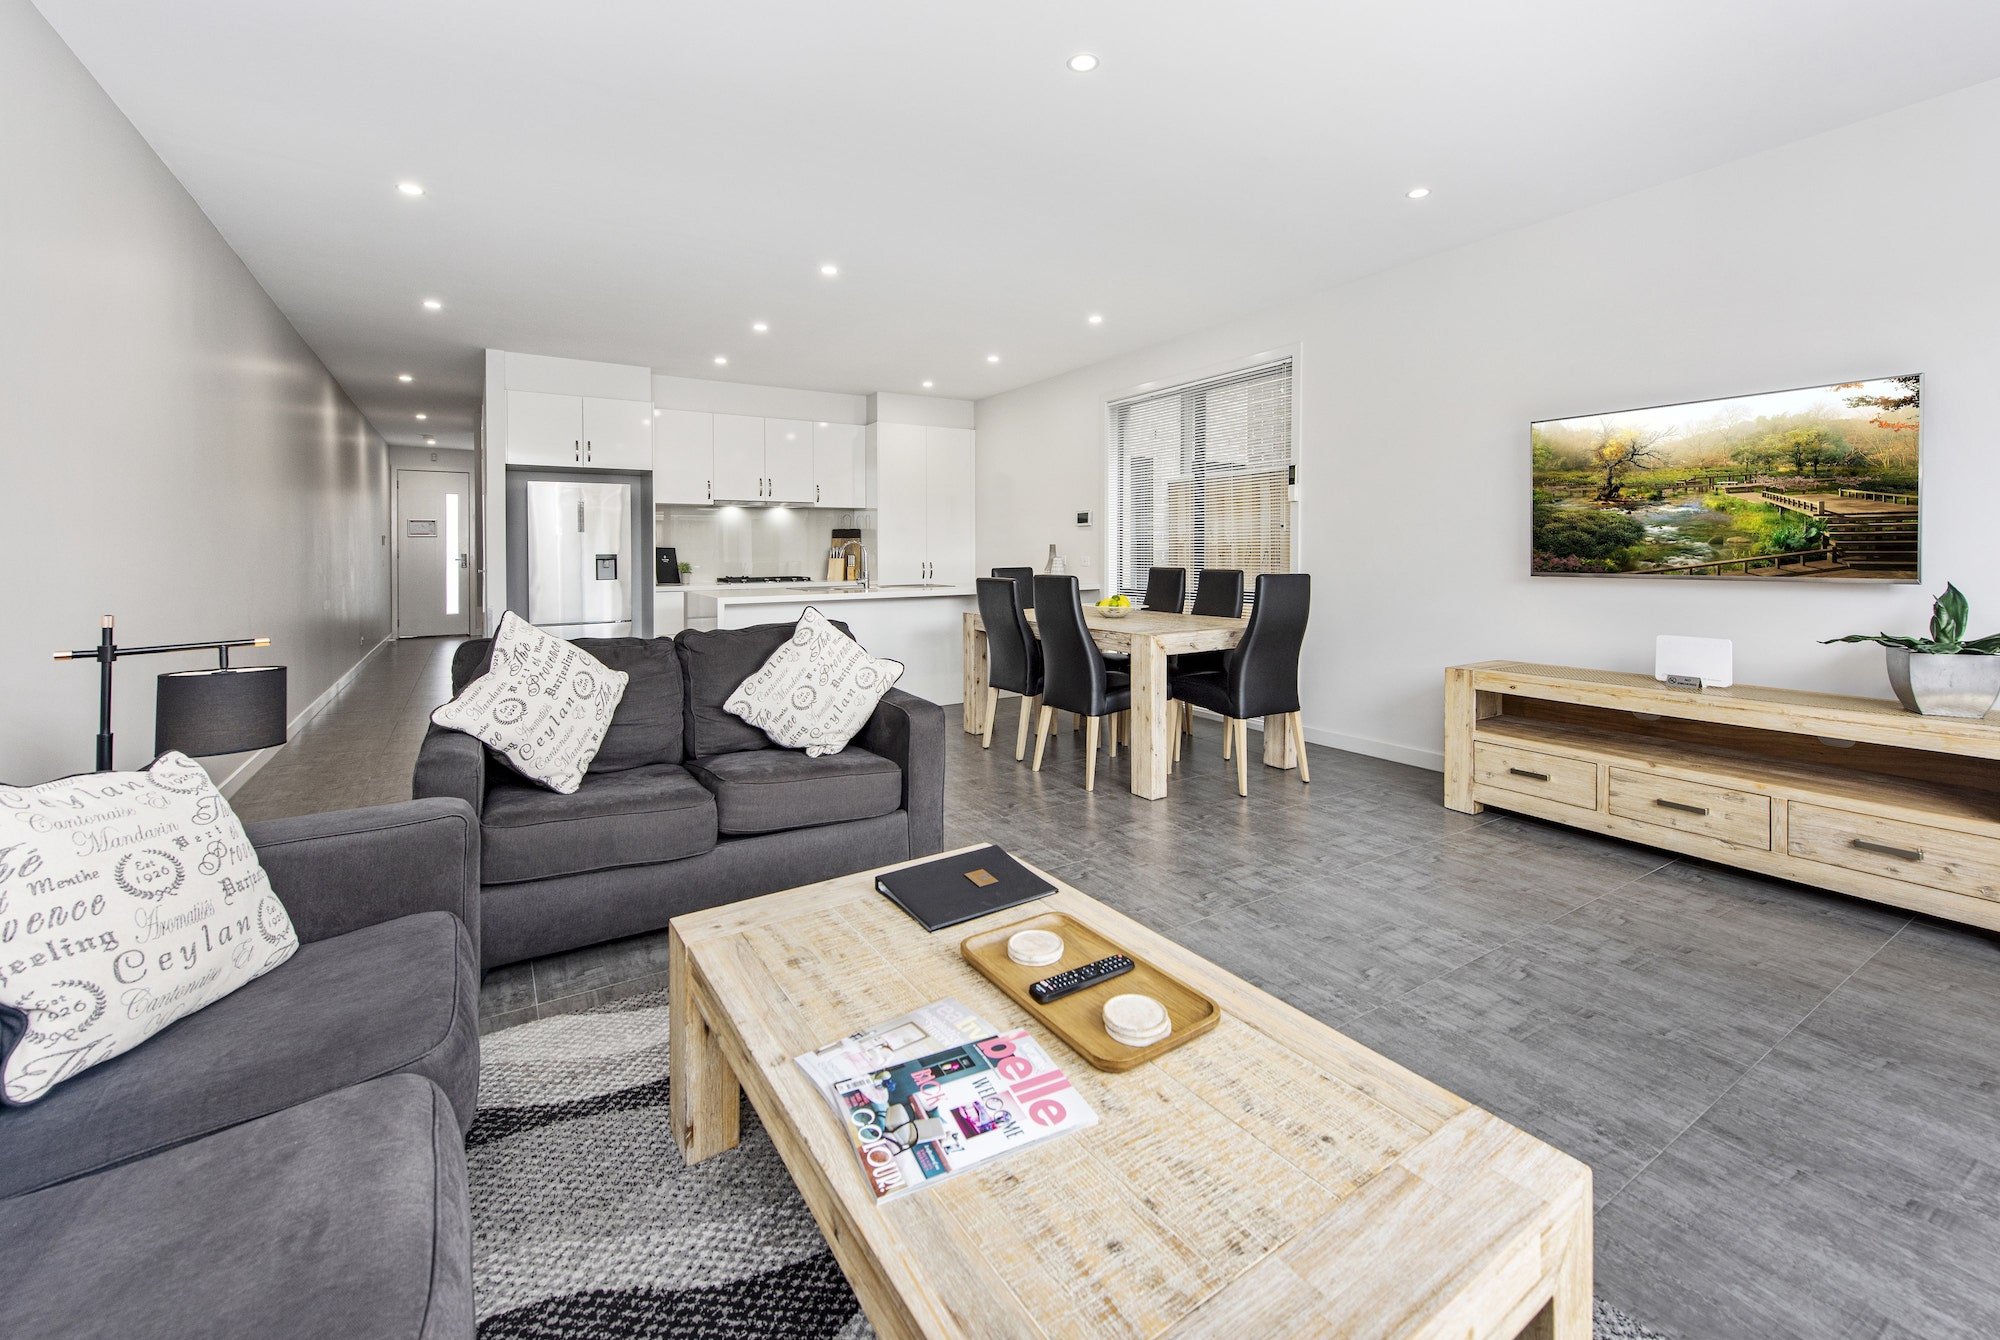 fawkner-executive-suites-and-serviced-apartments-accommodation-three-bedroom-townhouse-1.jpg